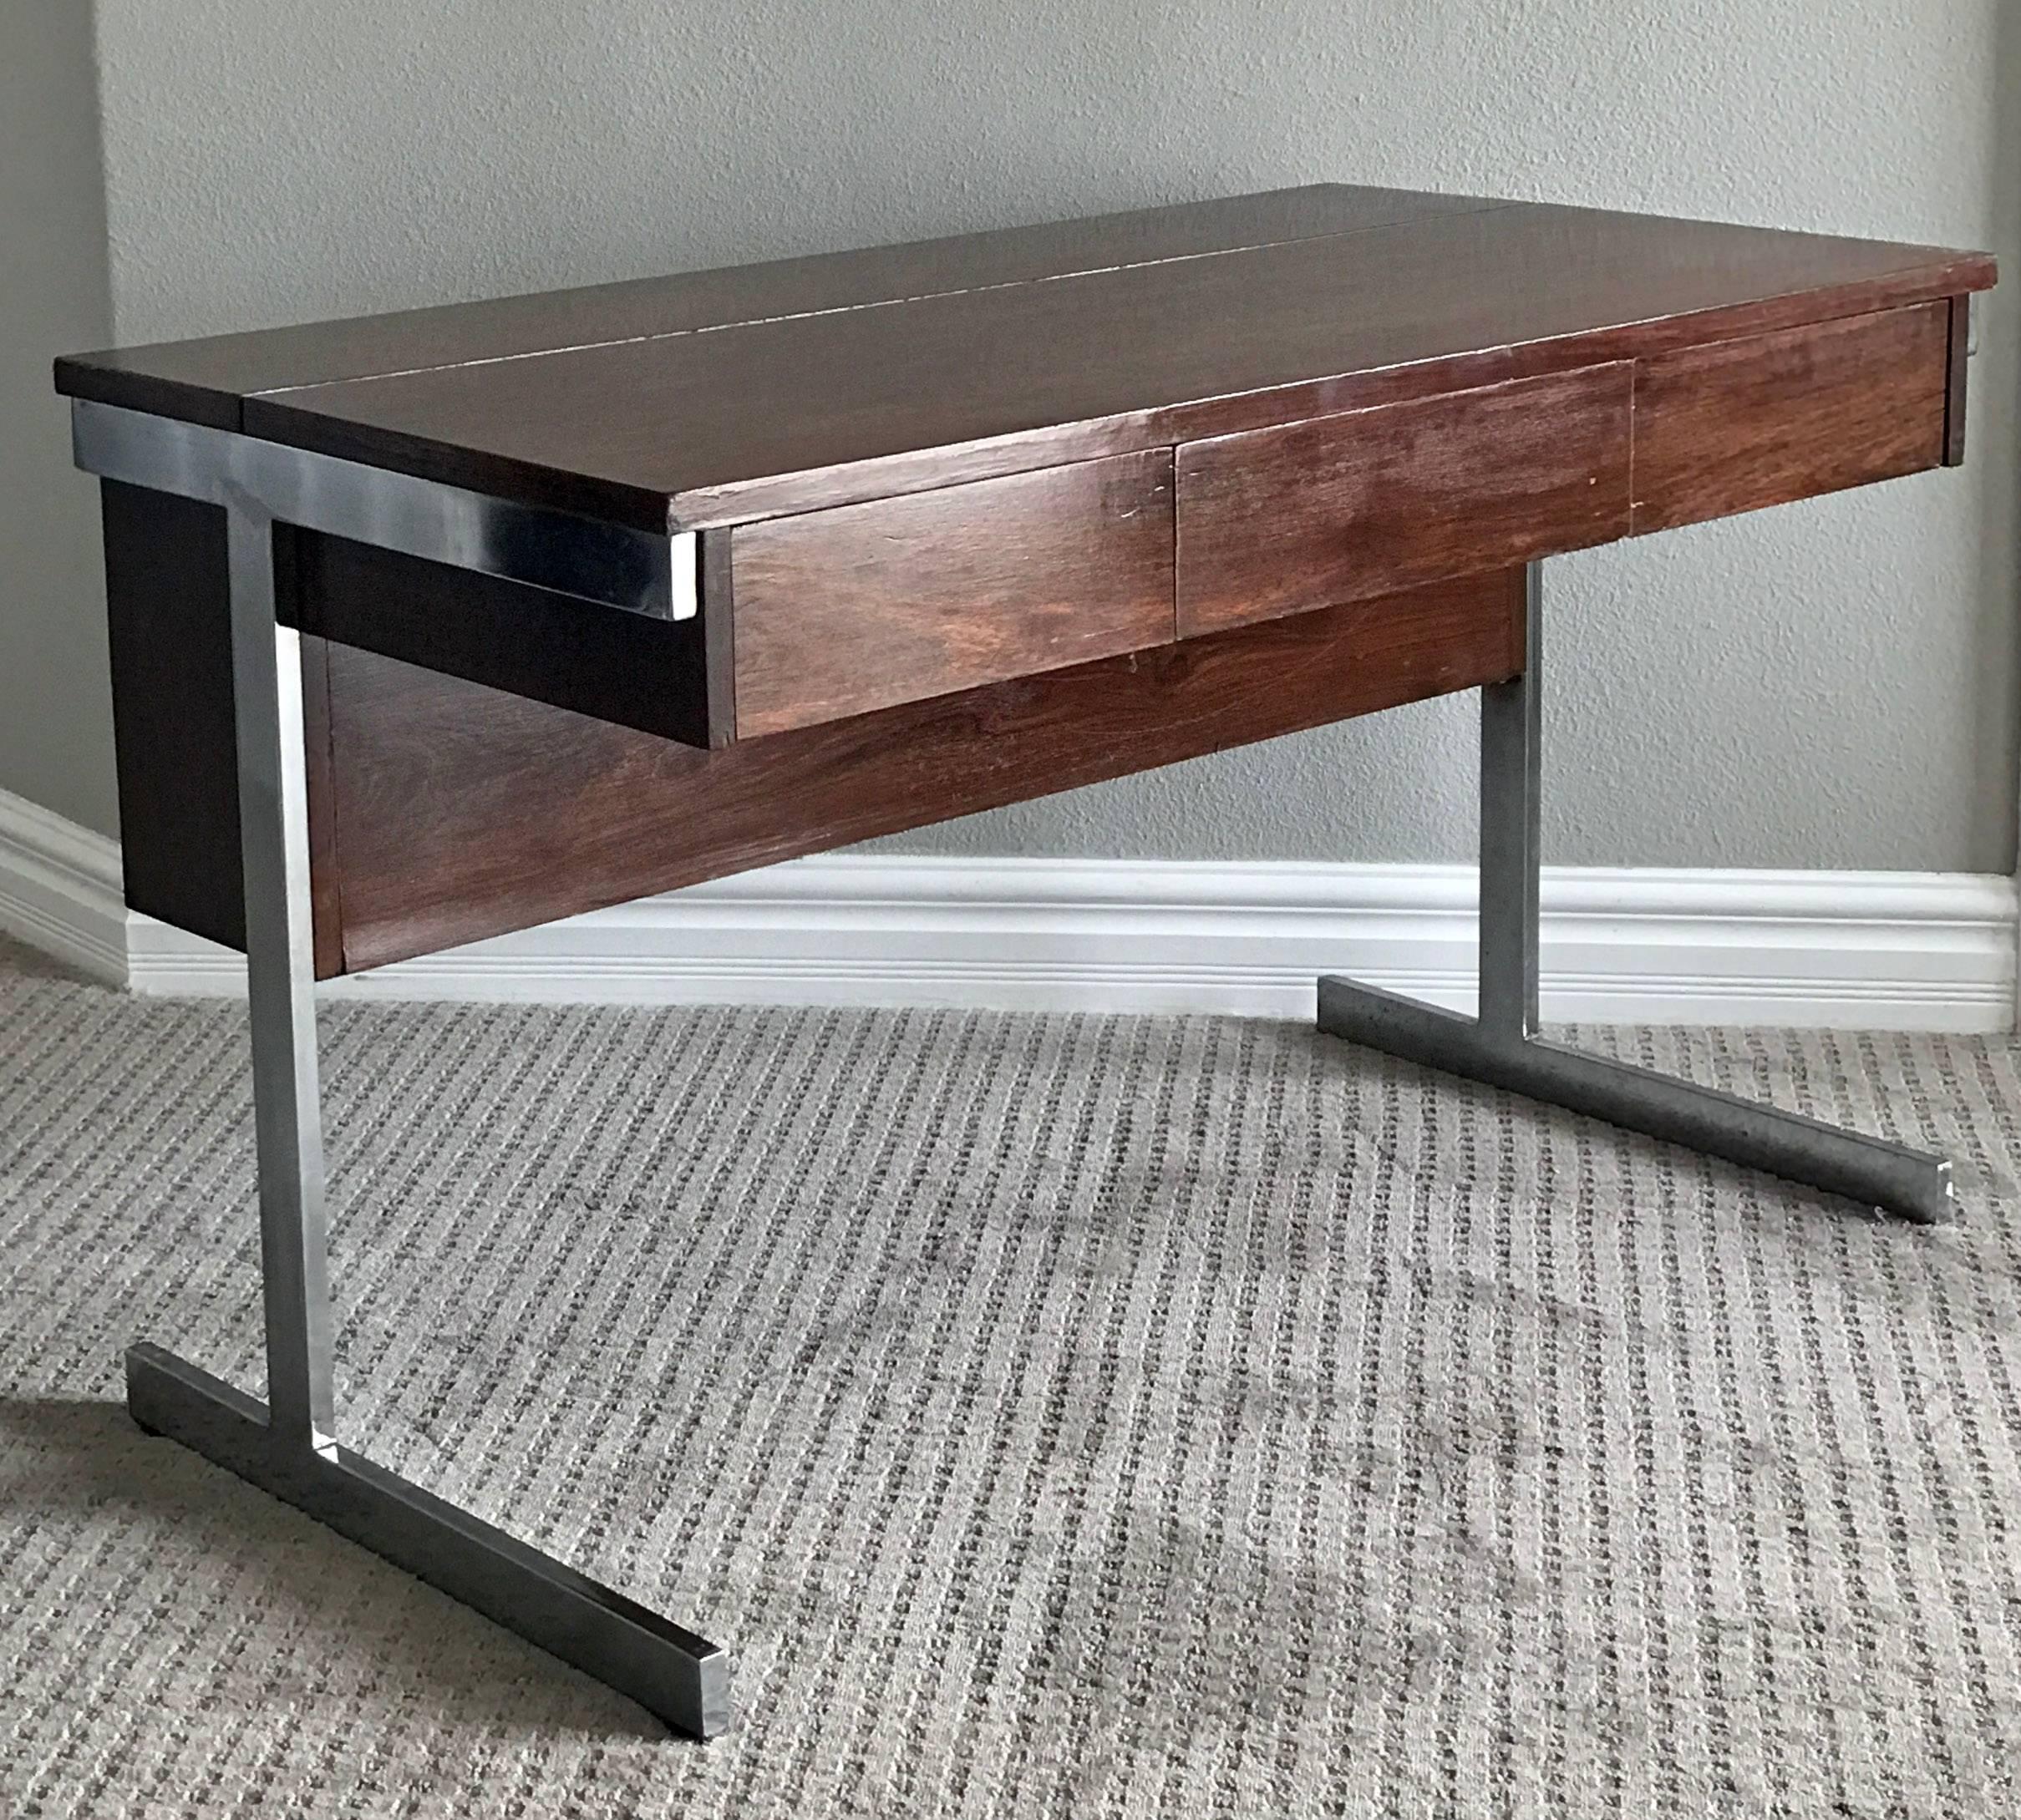 A stunning piece of Mid-Century Modern design; this desk from Lane Furniture company is made of solid rosewood with a light gloss finish. The desk features a flip up compartment for file folders, as well as three drawers in the front and finished